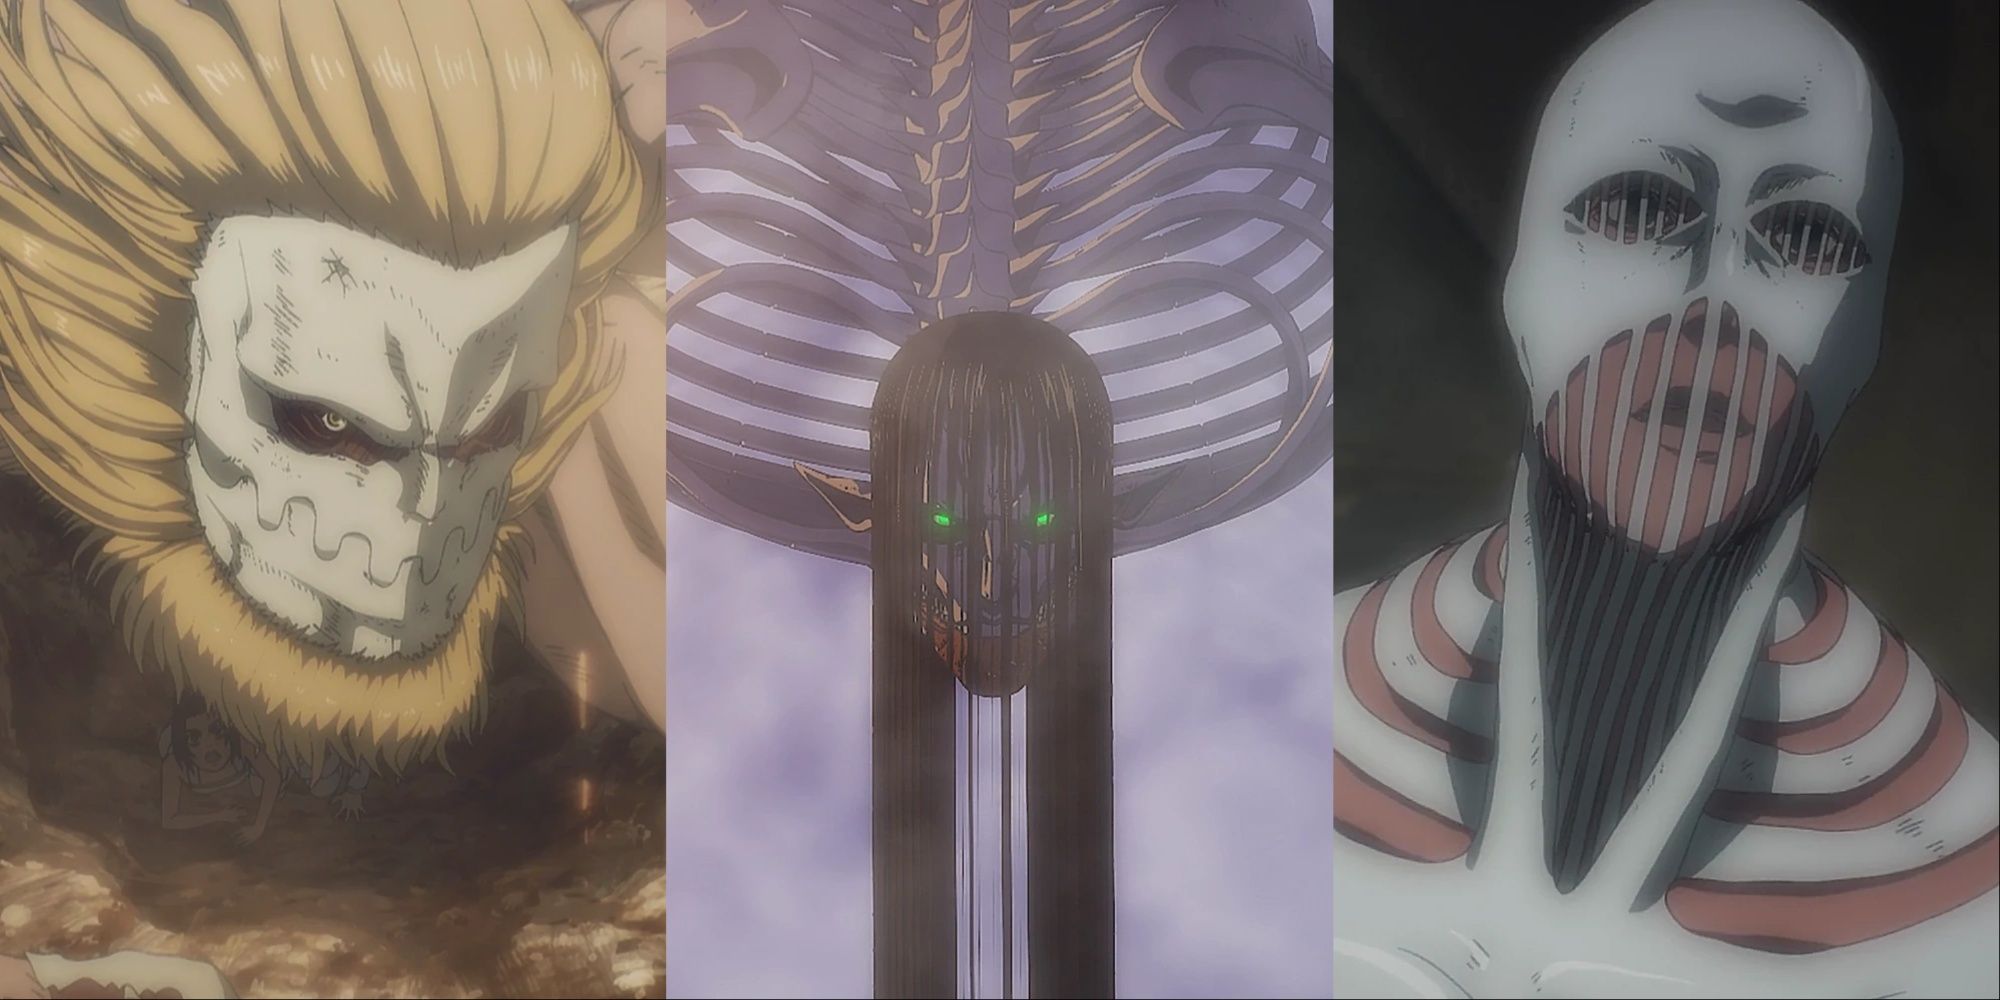 The Jaw, Founding and Warhammer Titans from Attack On Titan.